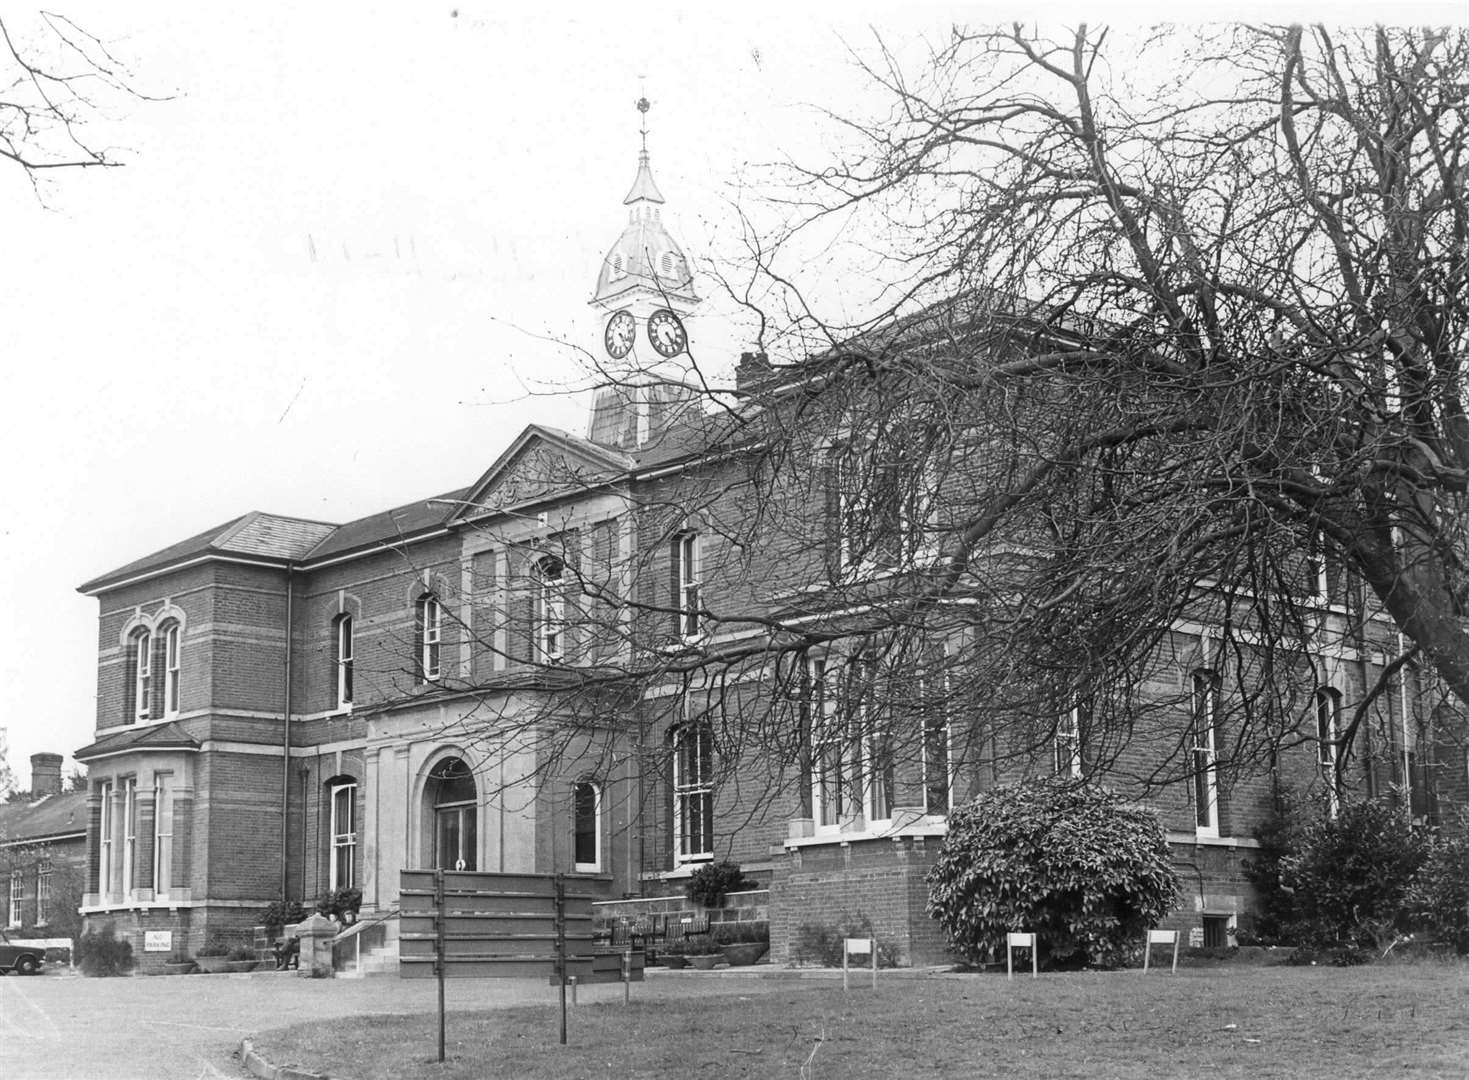 St Augustine's hospital at Chartham pictured in 1976